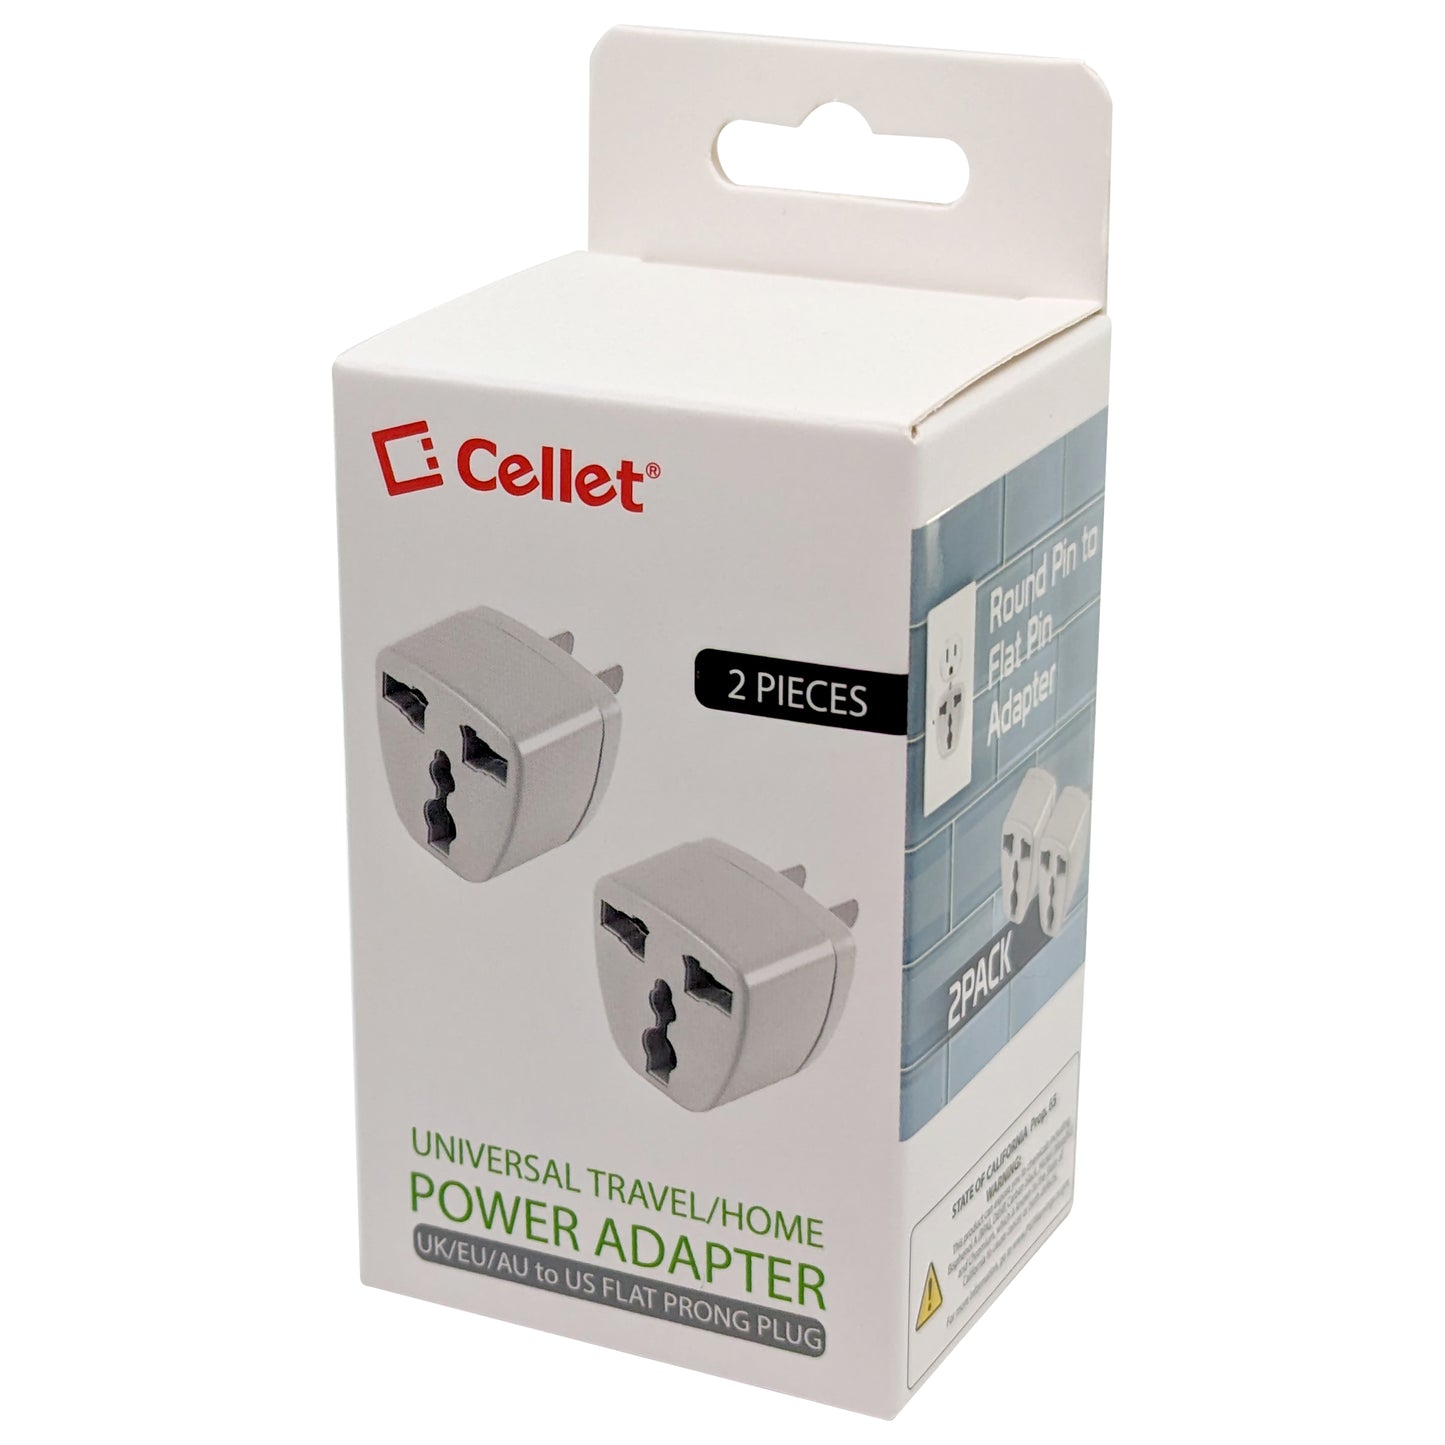 Cellet Universal Travel AC Wall Power Adapter to Convert China, UK, AU, EU & other Plugs to US Plug Socket (2PACK)